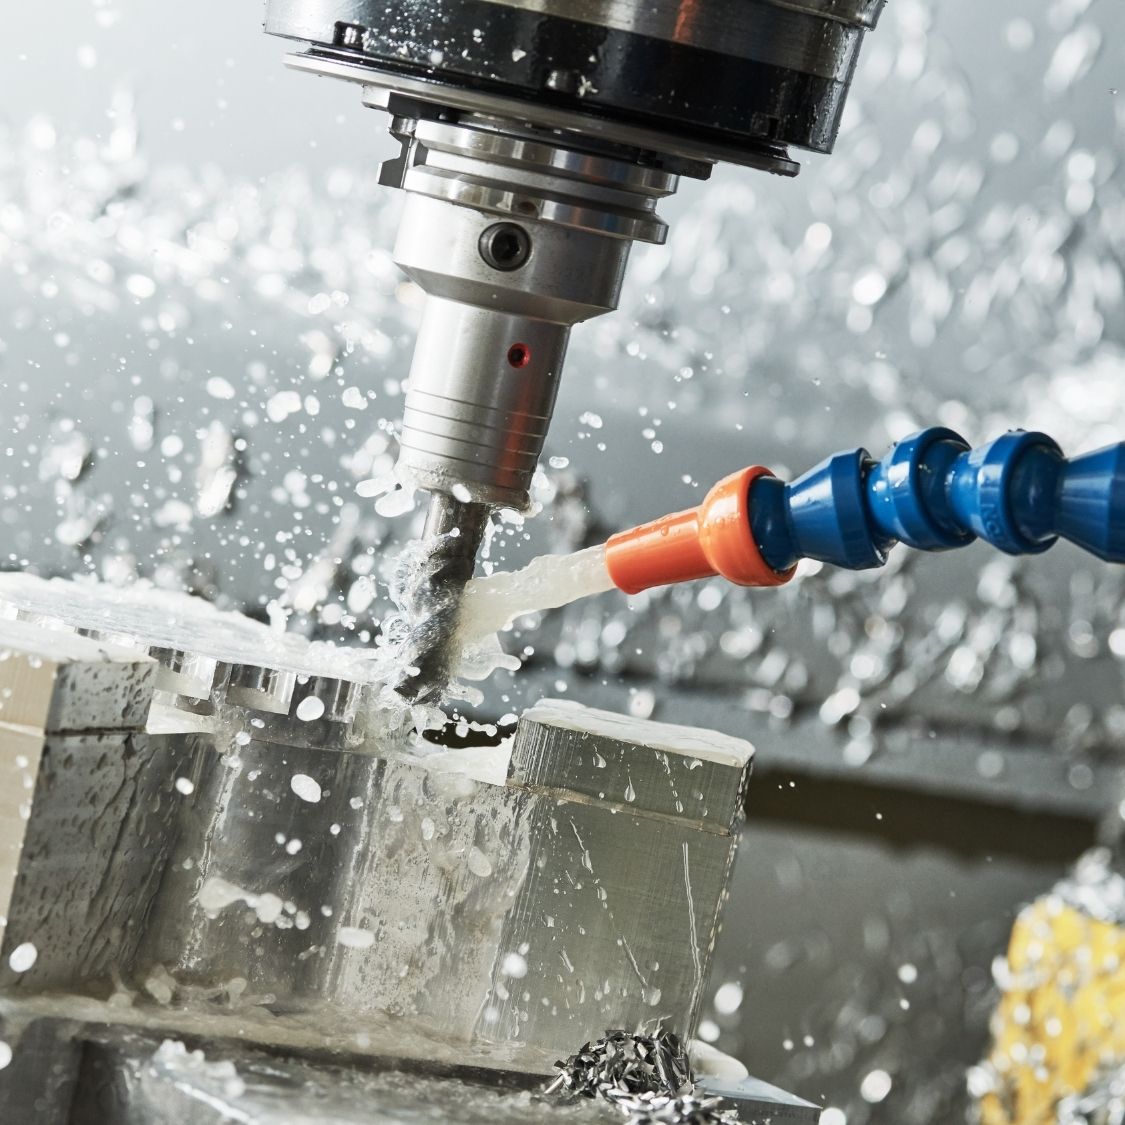 Essential Safety Tips for Technicians in CNC Machine Shops